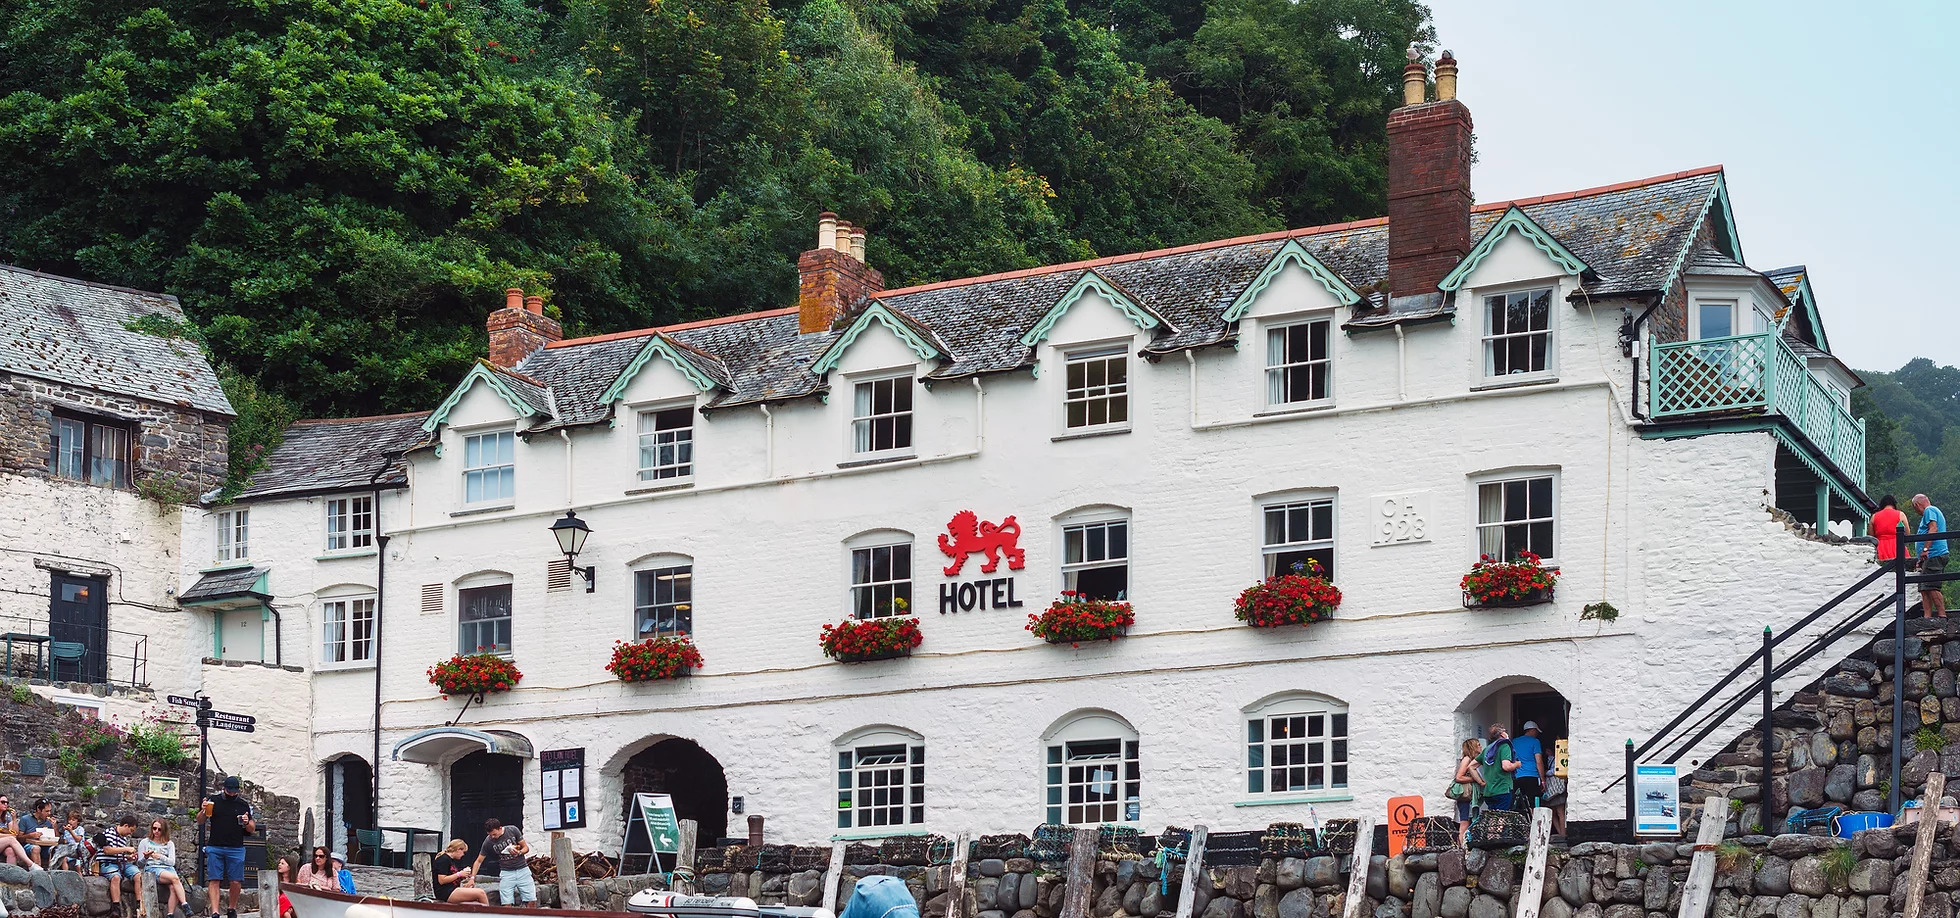 Introducing… The Red Lion Hotel